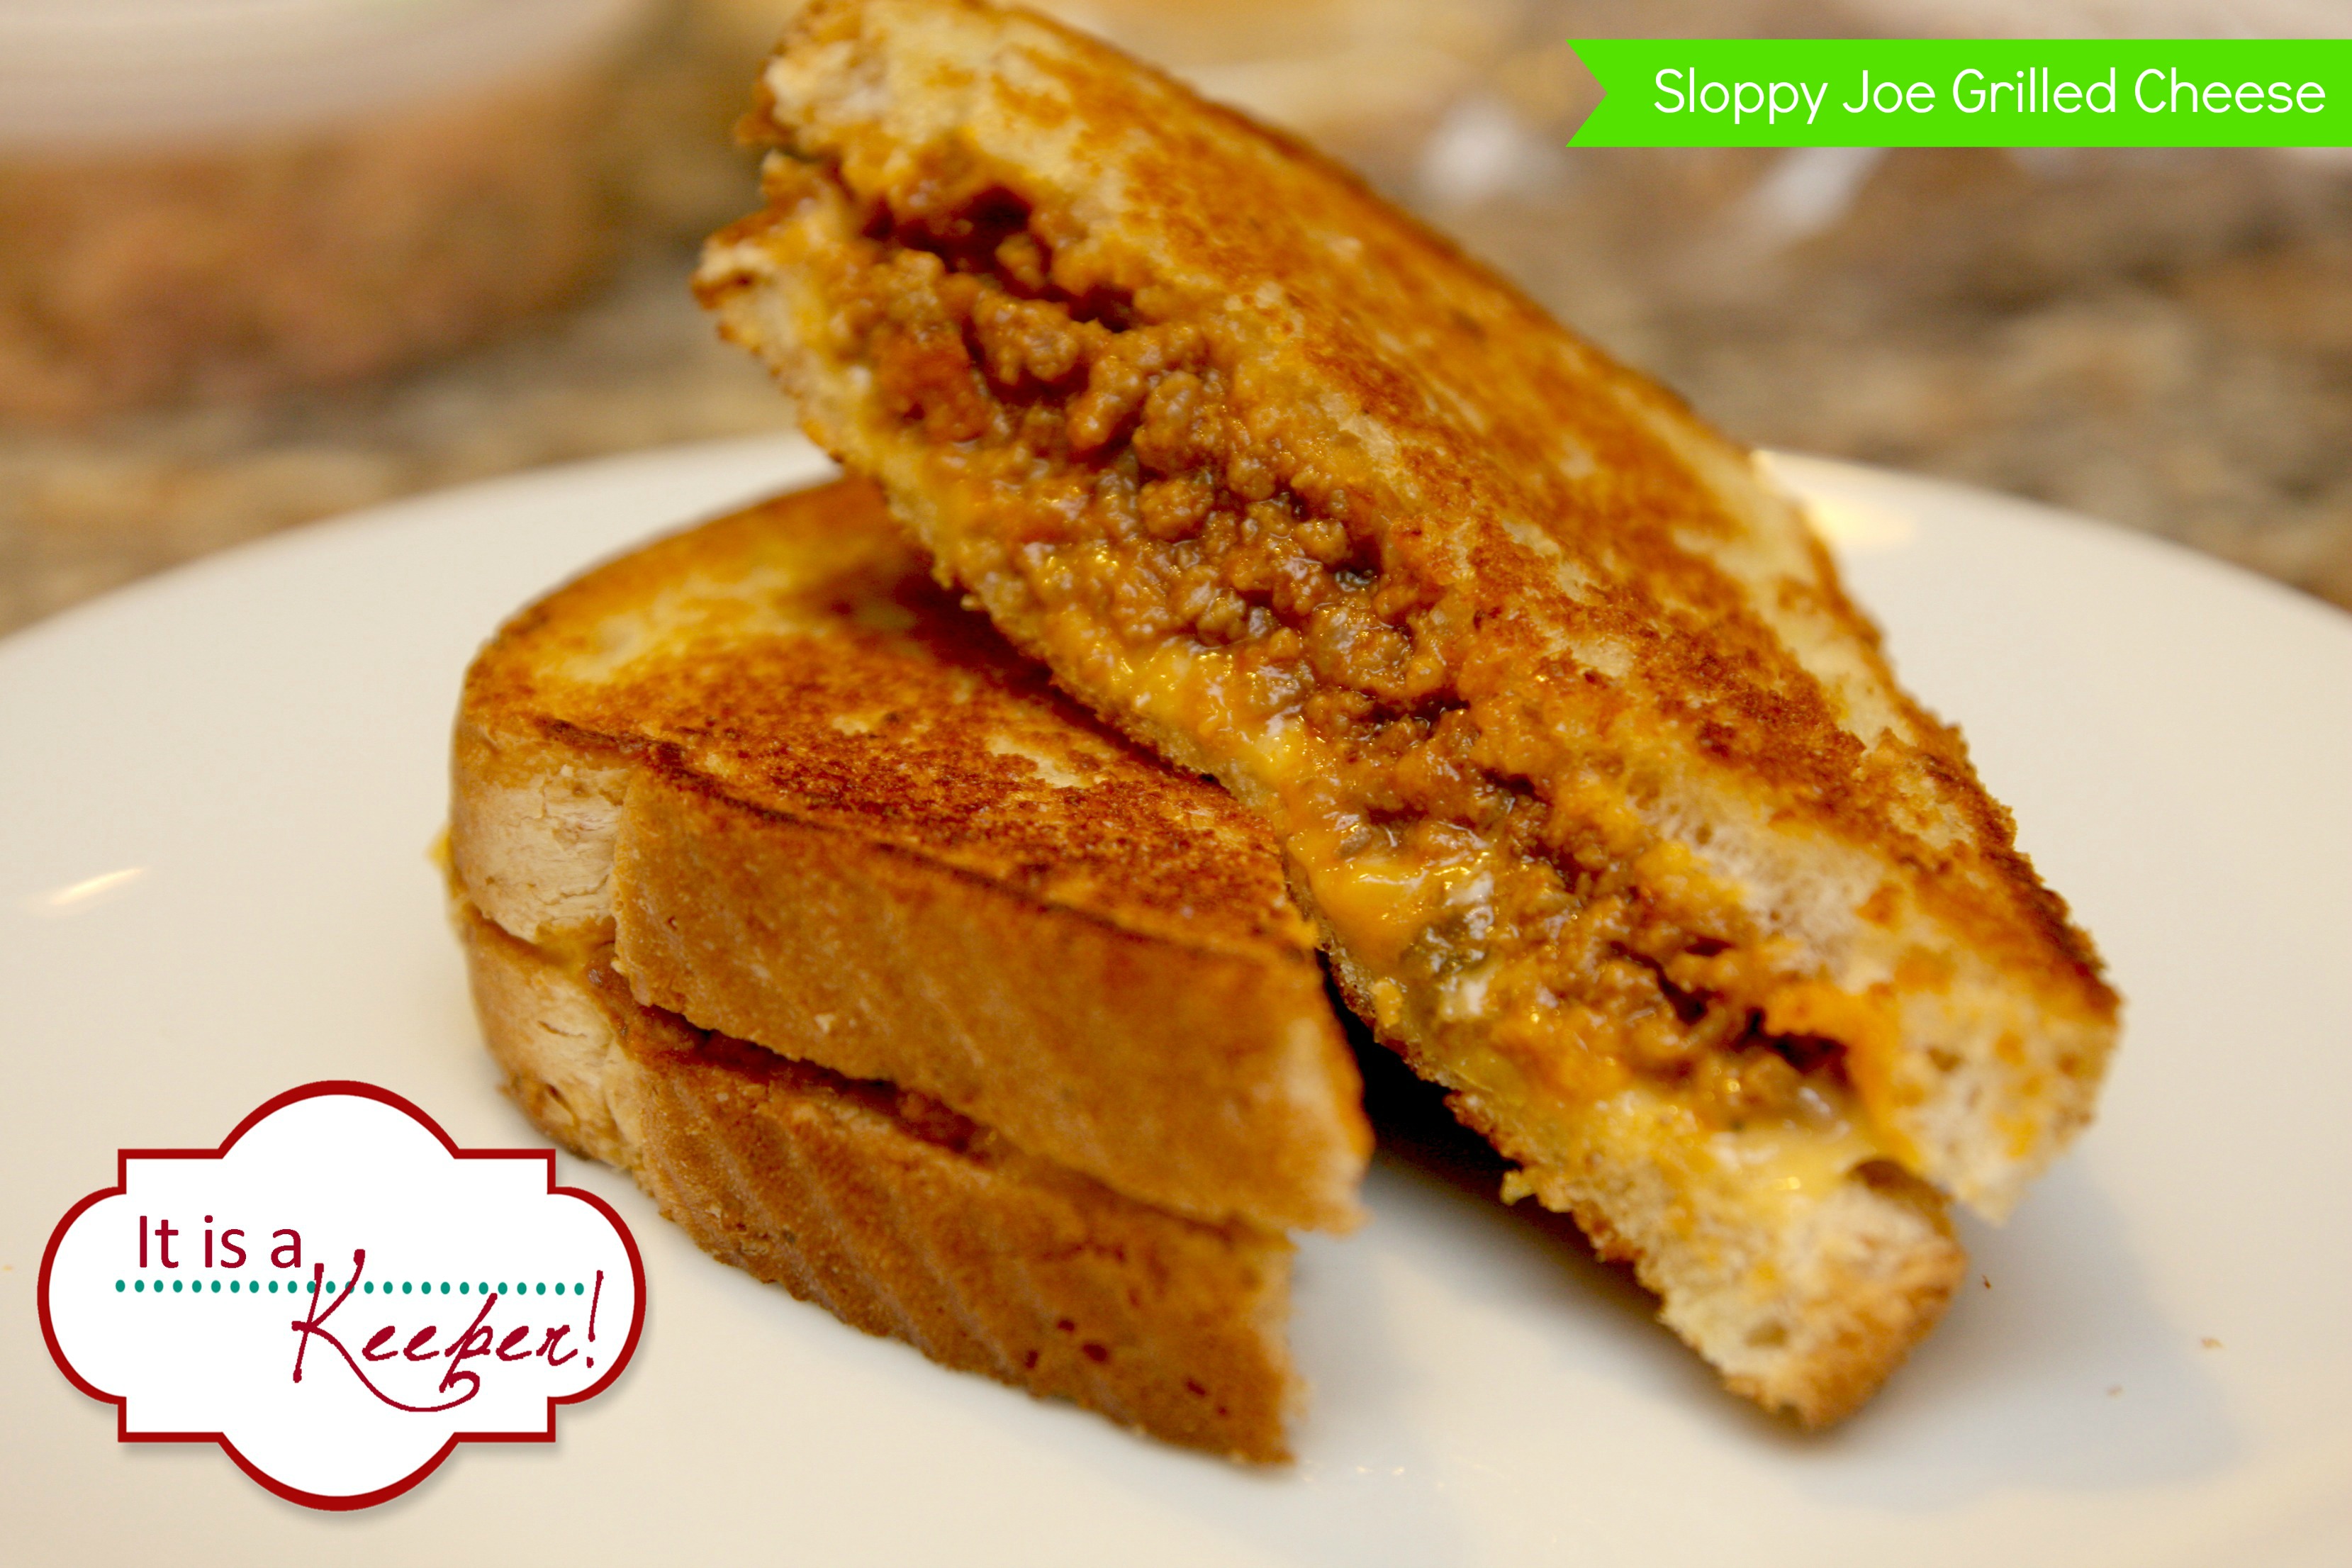 Sloppy Joe Grilled Cheese It's a Keeper